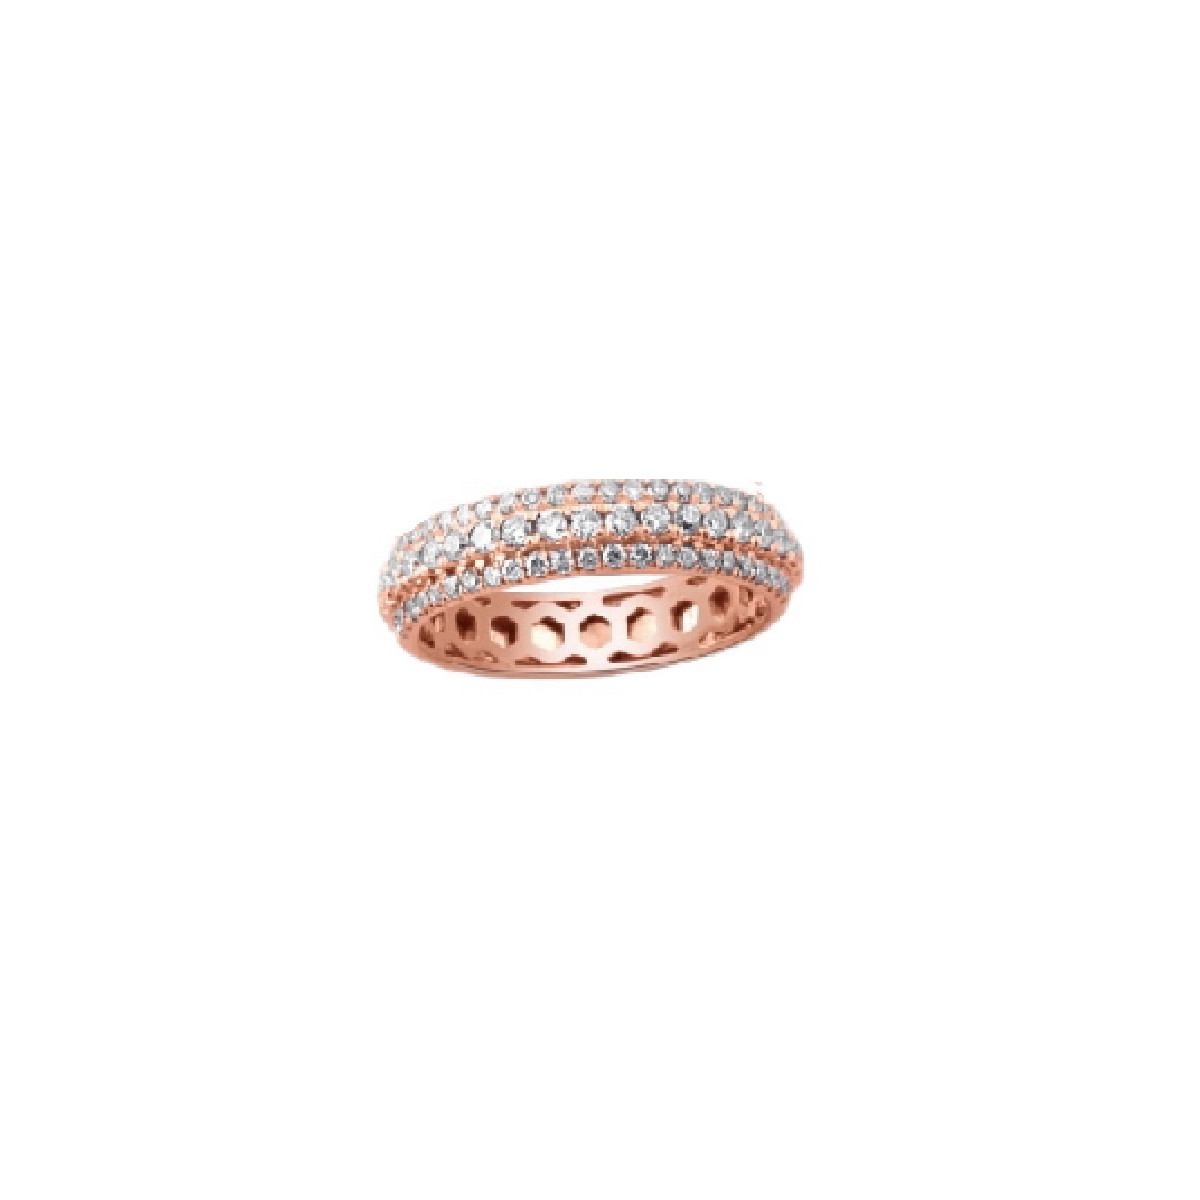 Ring gold and diamonds